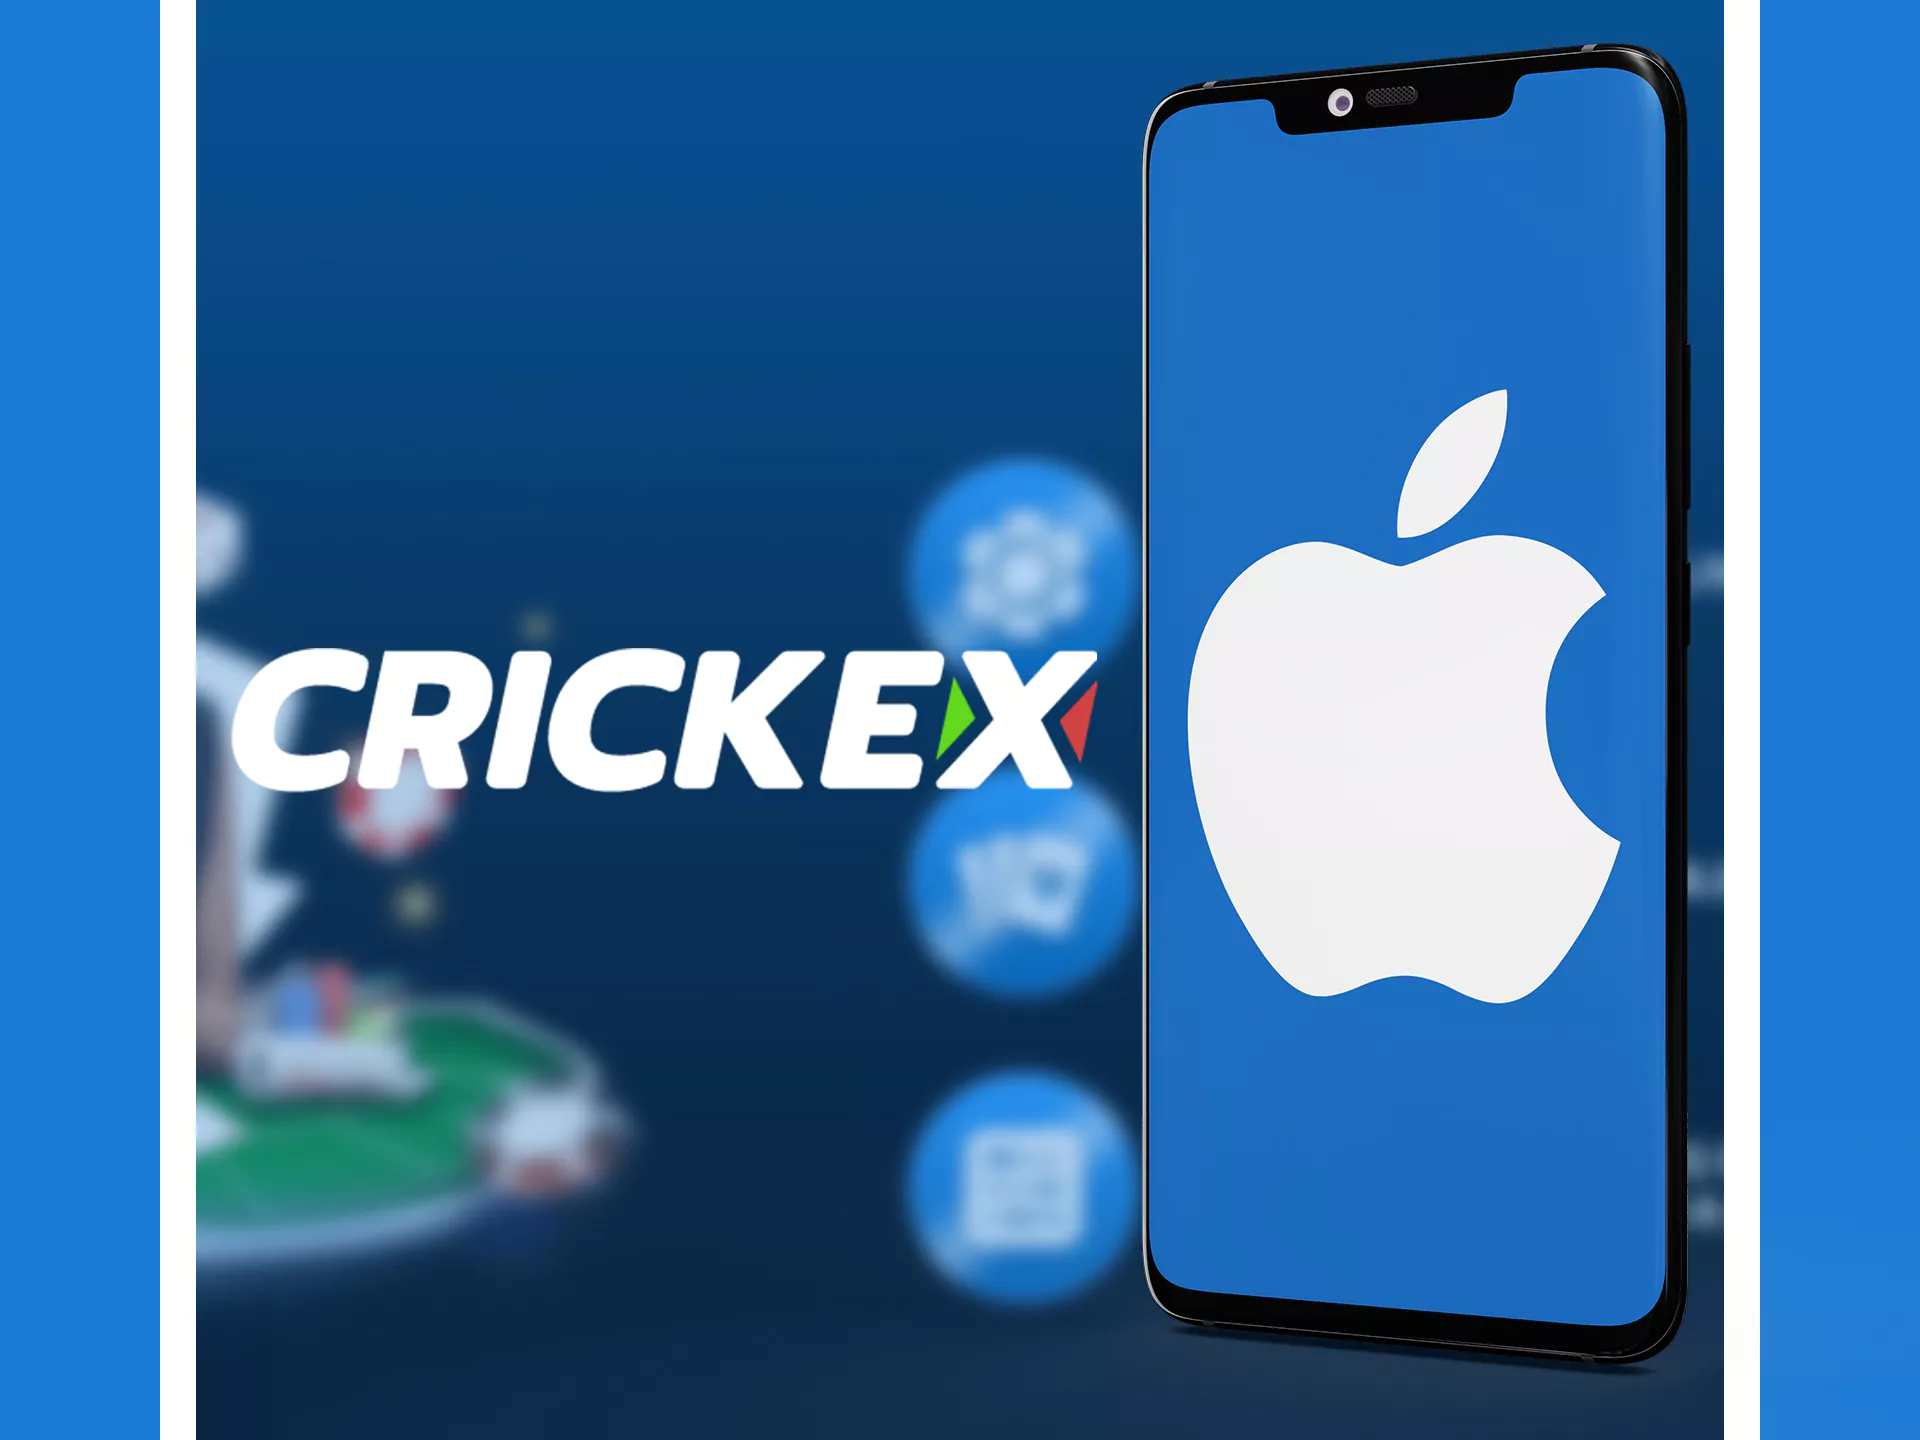 iOS devices support the mobile version of the Crickex site.